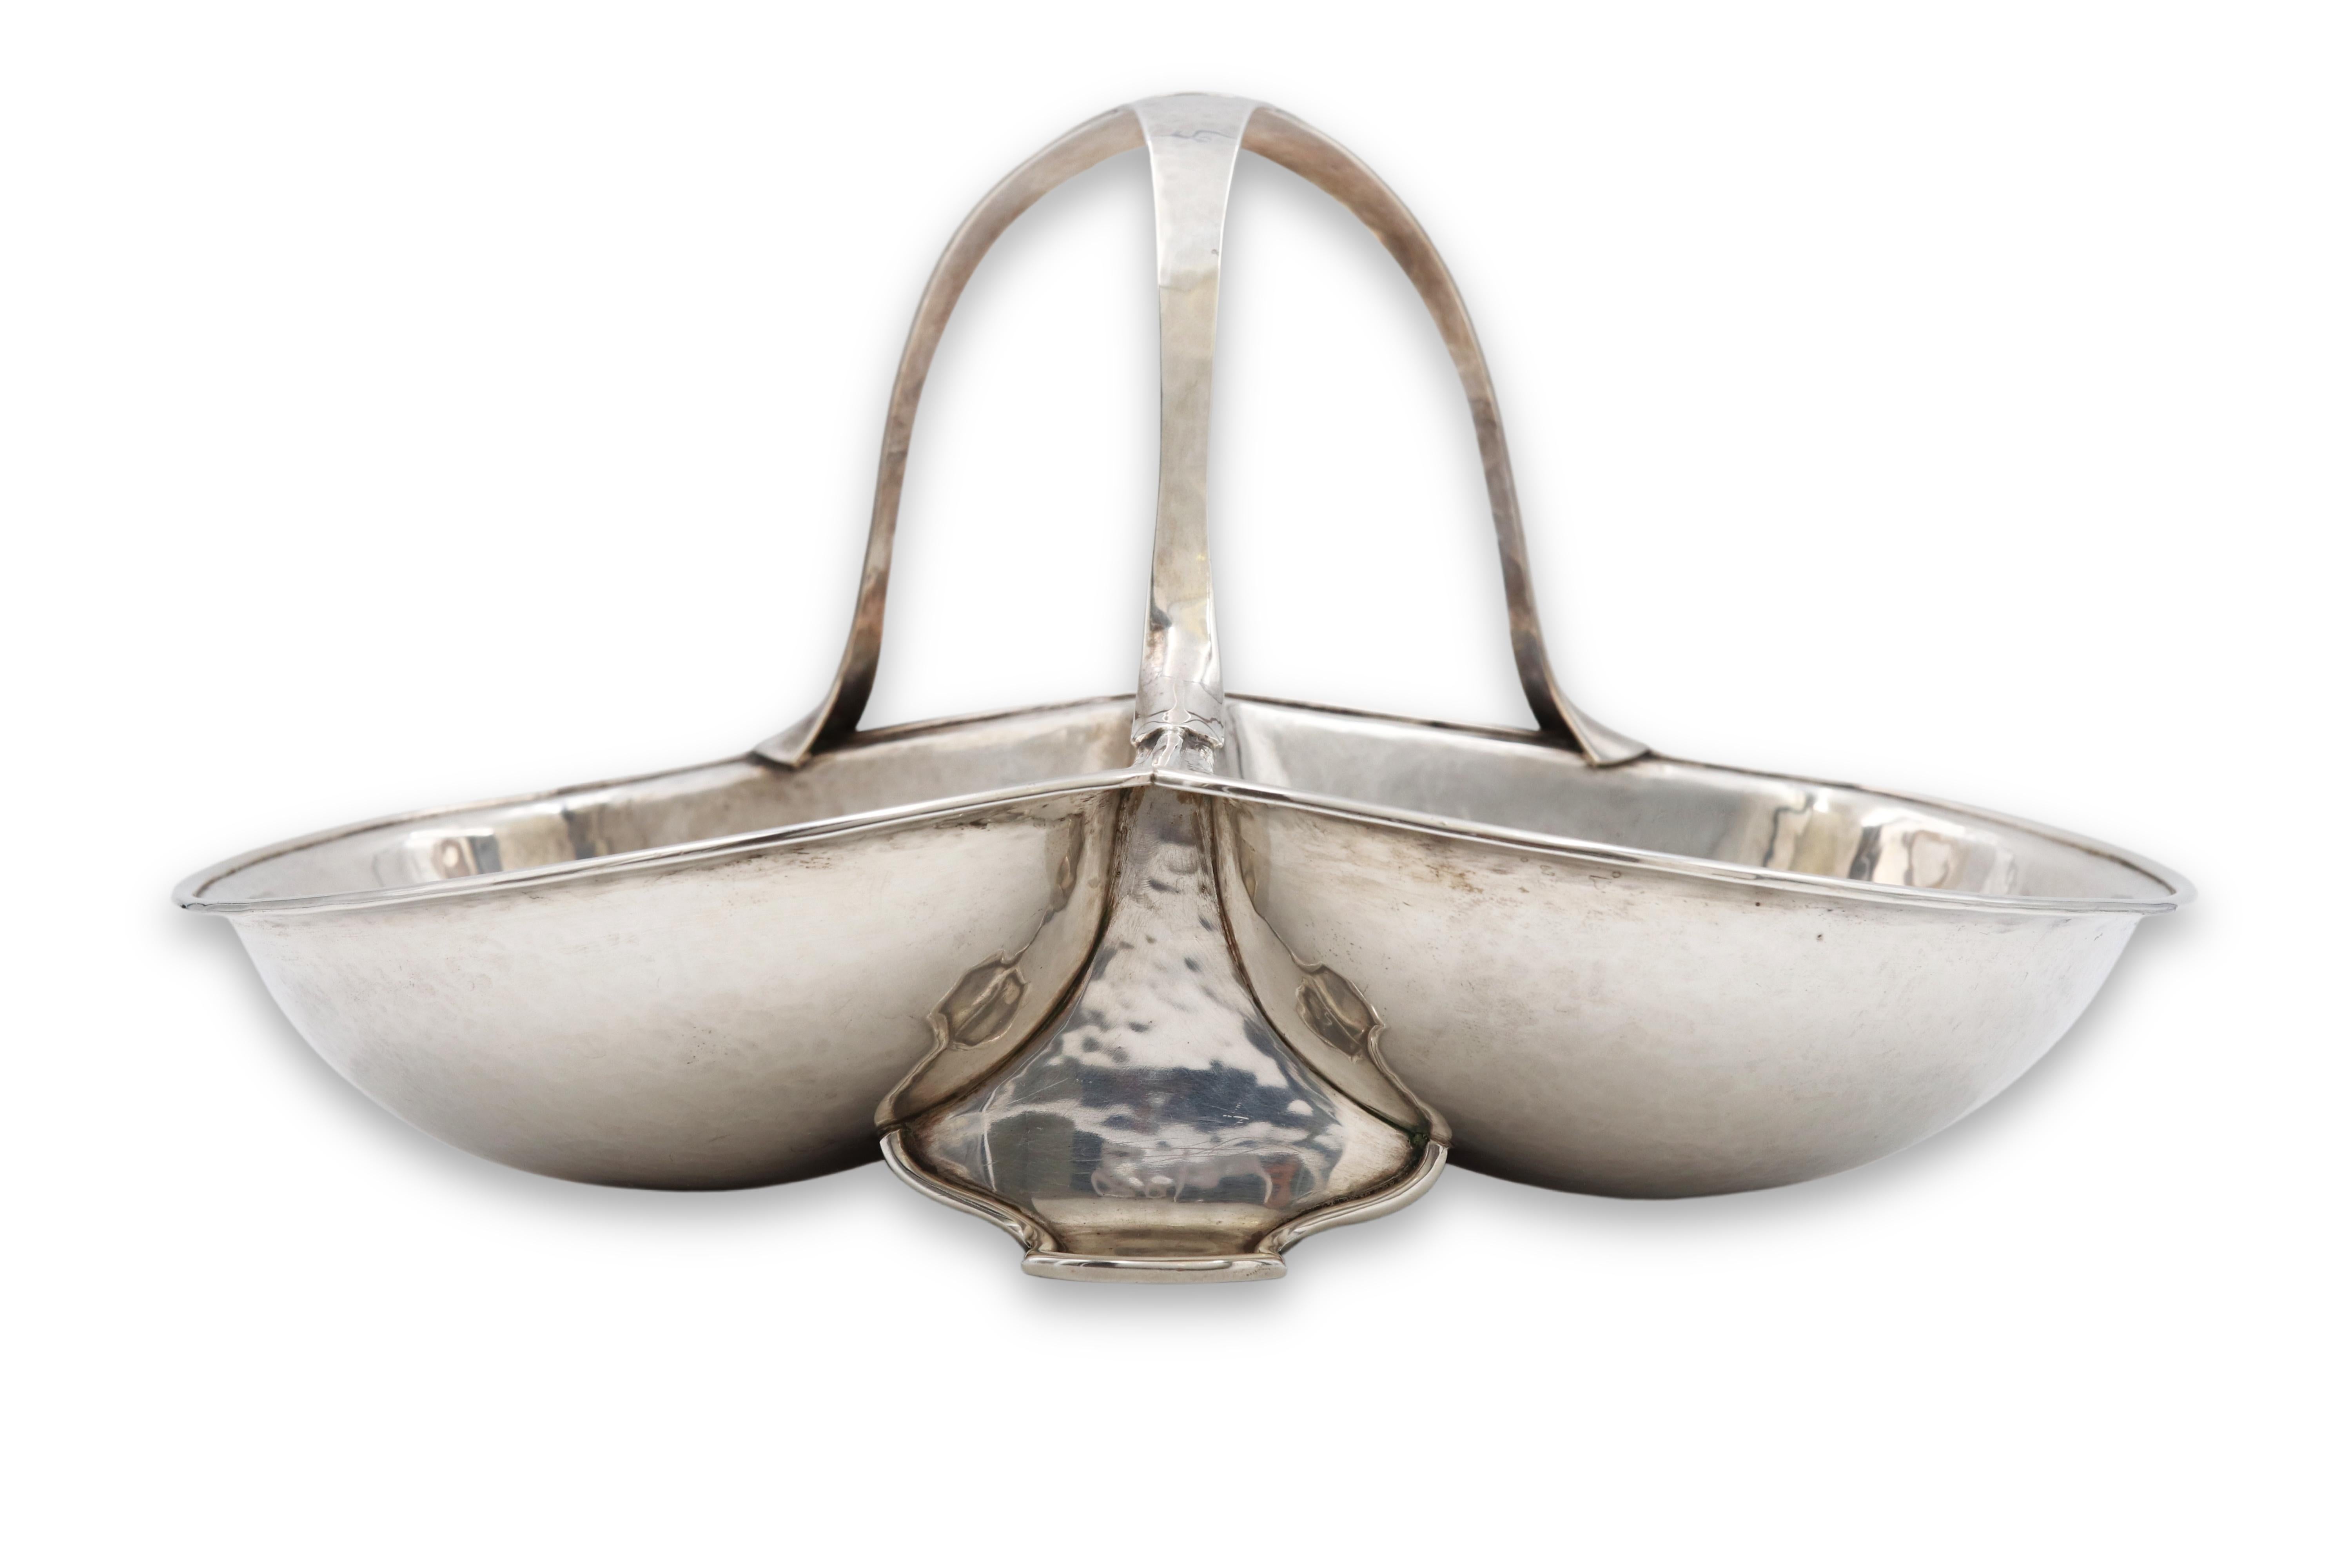 Sterling silver handmade condiment basket / three-part bowl by Lebolt & Co. with three compartments, standing on three shaped feet in Arts & Crafts style. Designed with gentle hand hammering and rounded handles as well as an applied monogram atop.